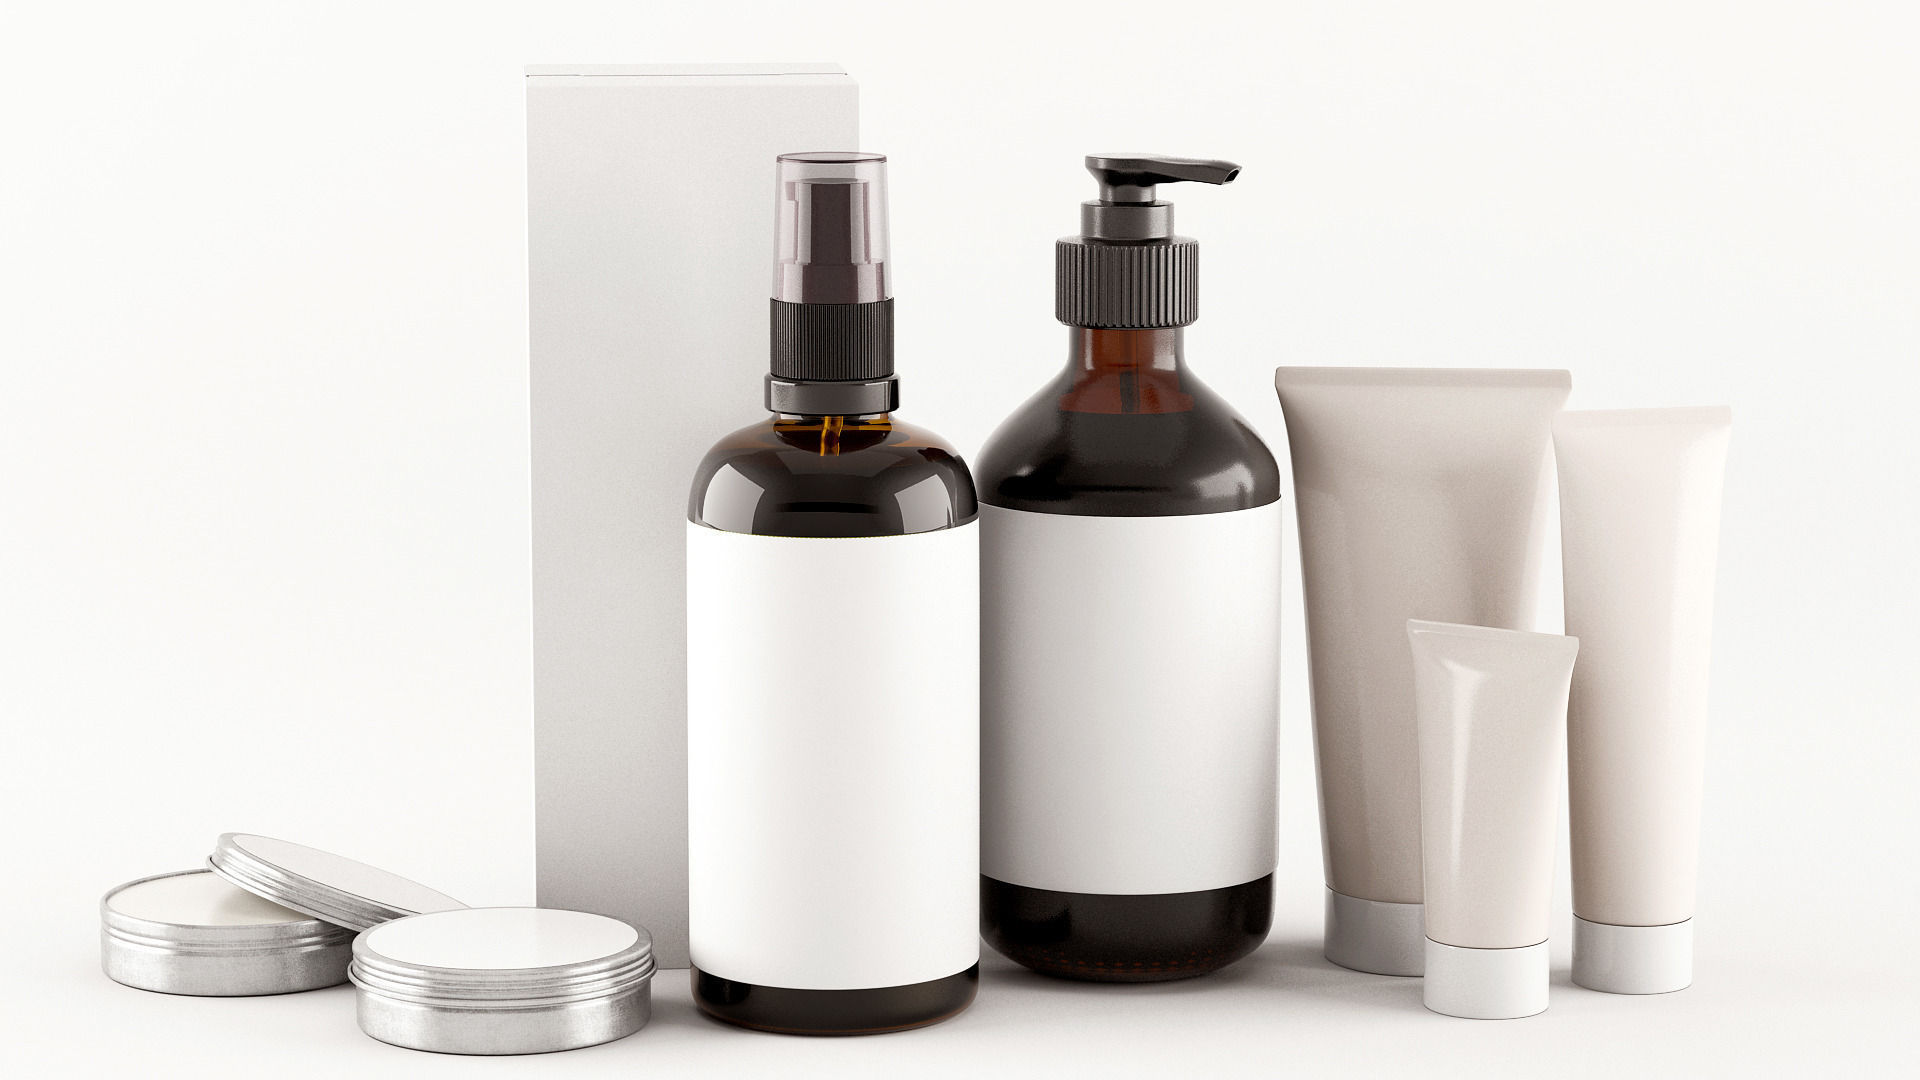 Different package for Personal Care, including bottle with pump, jar, tube and the cardboard box for them.